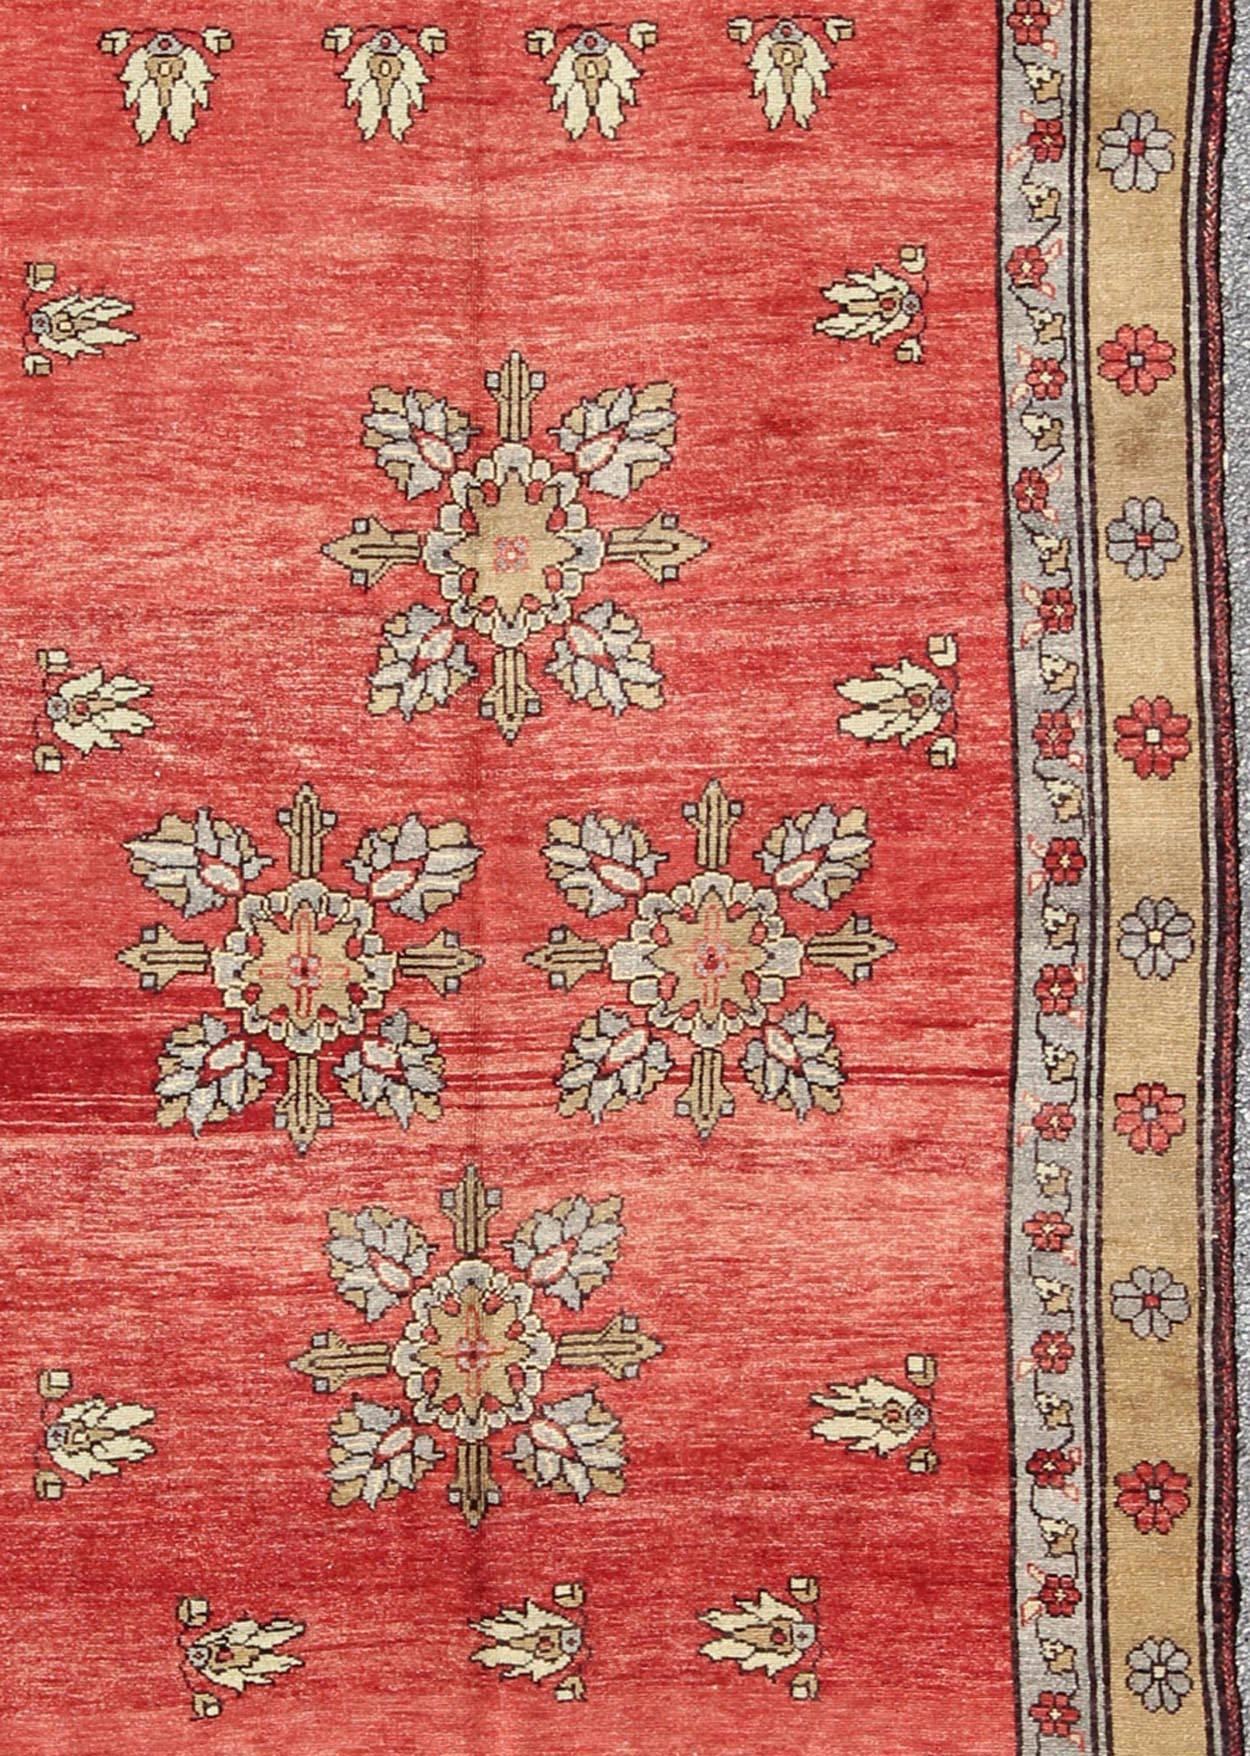 Vintage Turkish Oushak Carpet with Flowers in the Central Field and Borders In Excellent Condition For Sale In Atlanta, GA